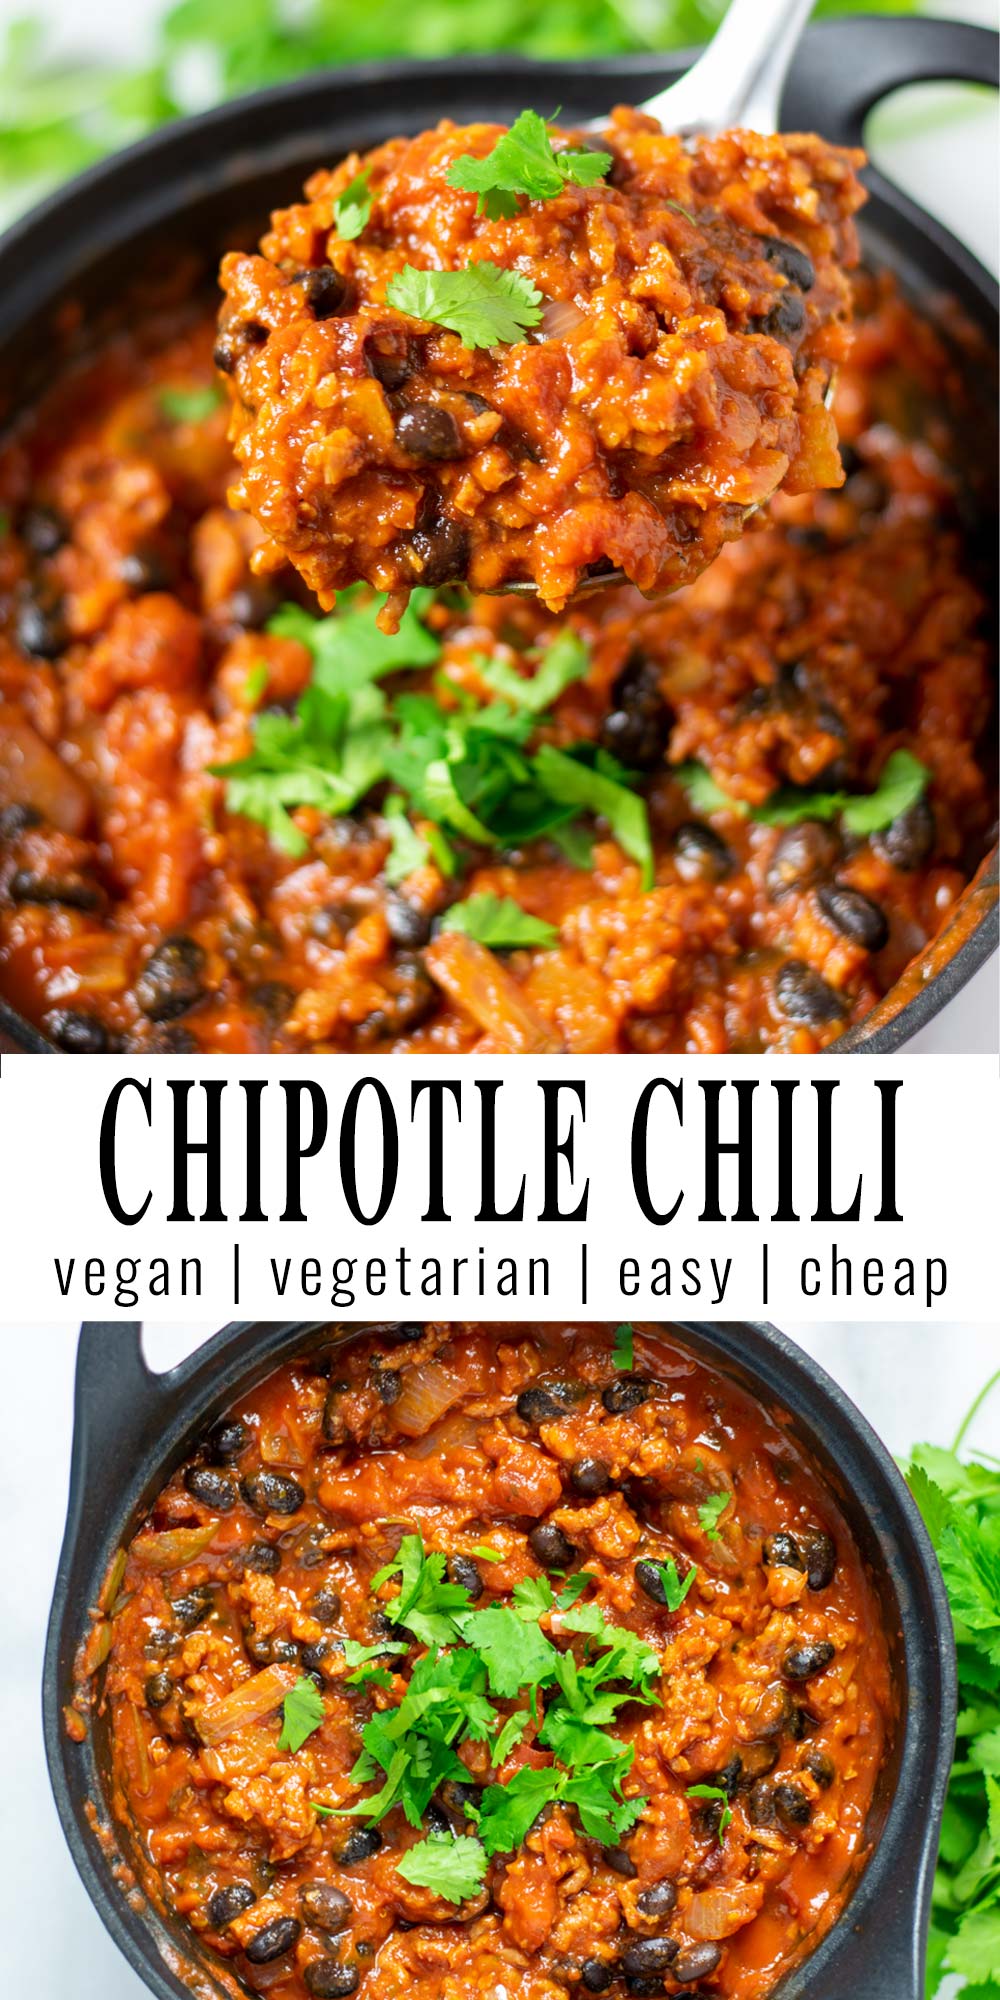 Collage of two pictures of the Chipotle Chili with recipe title text.